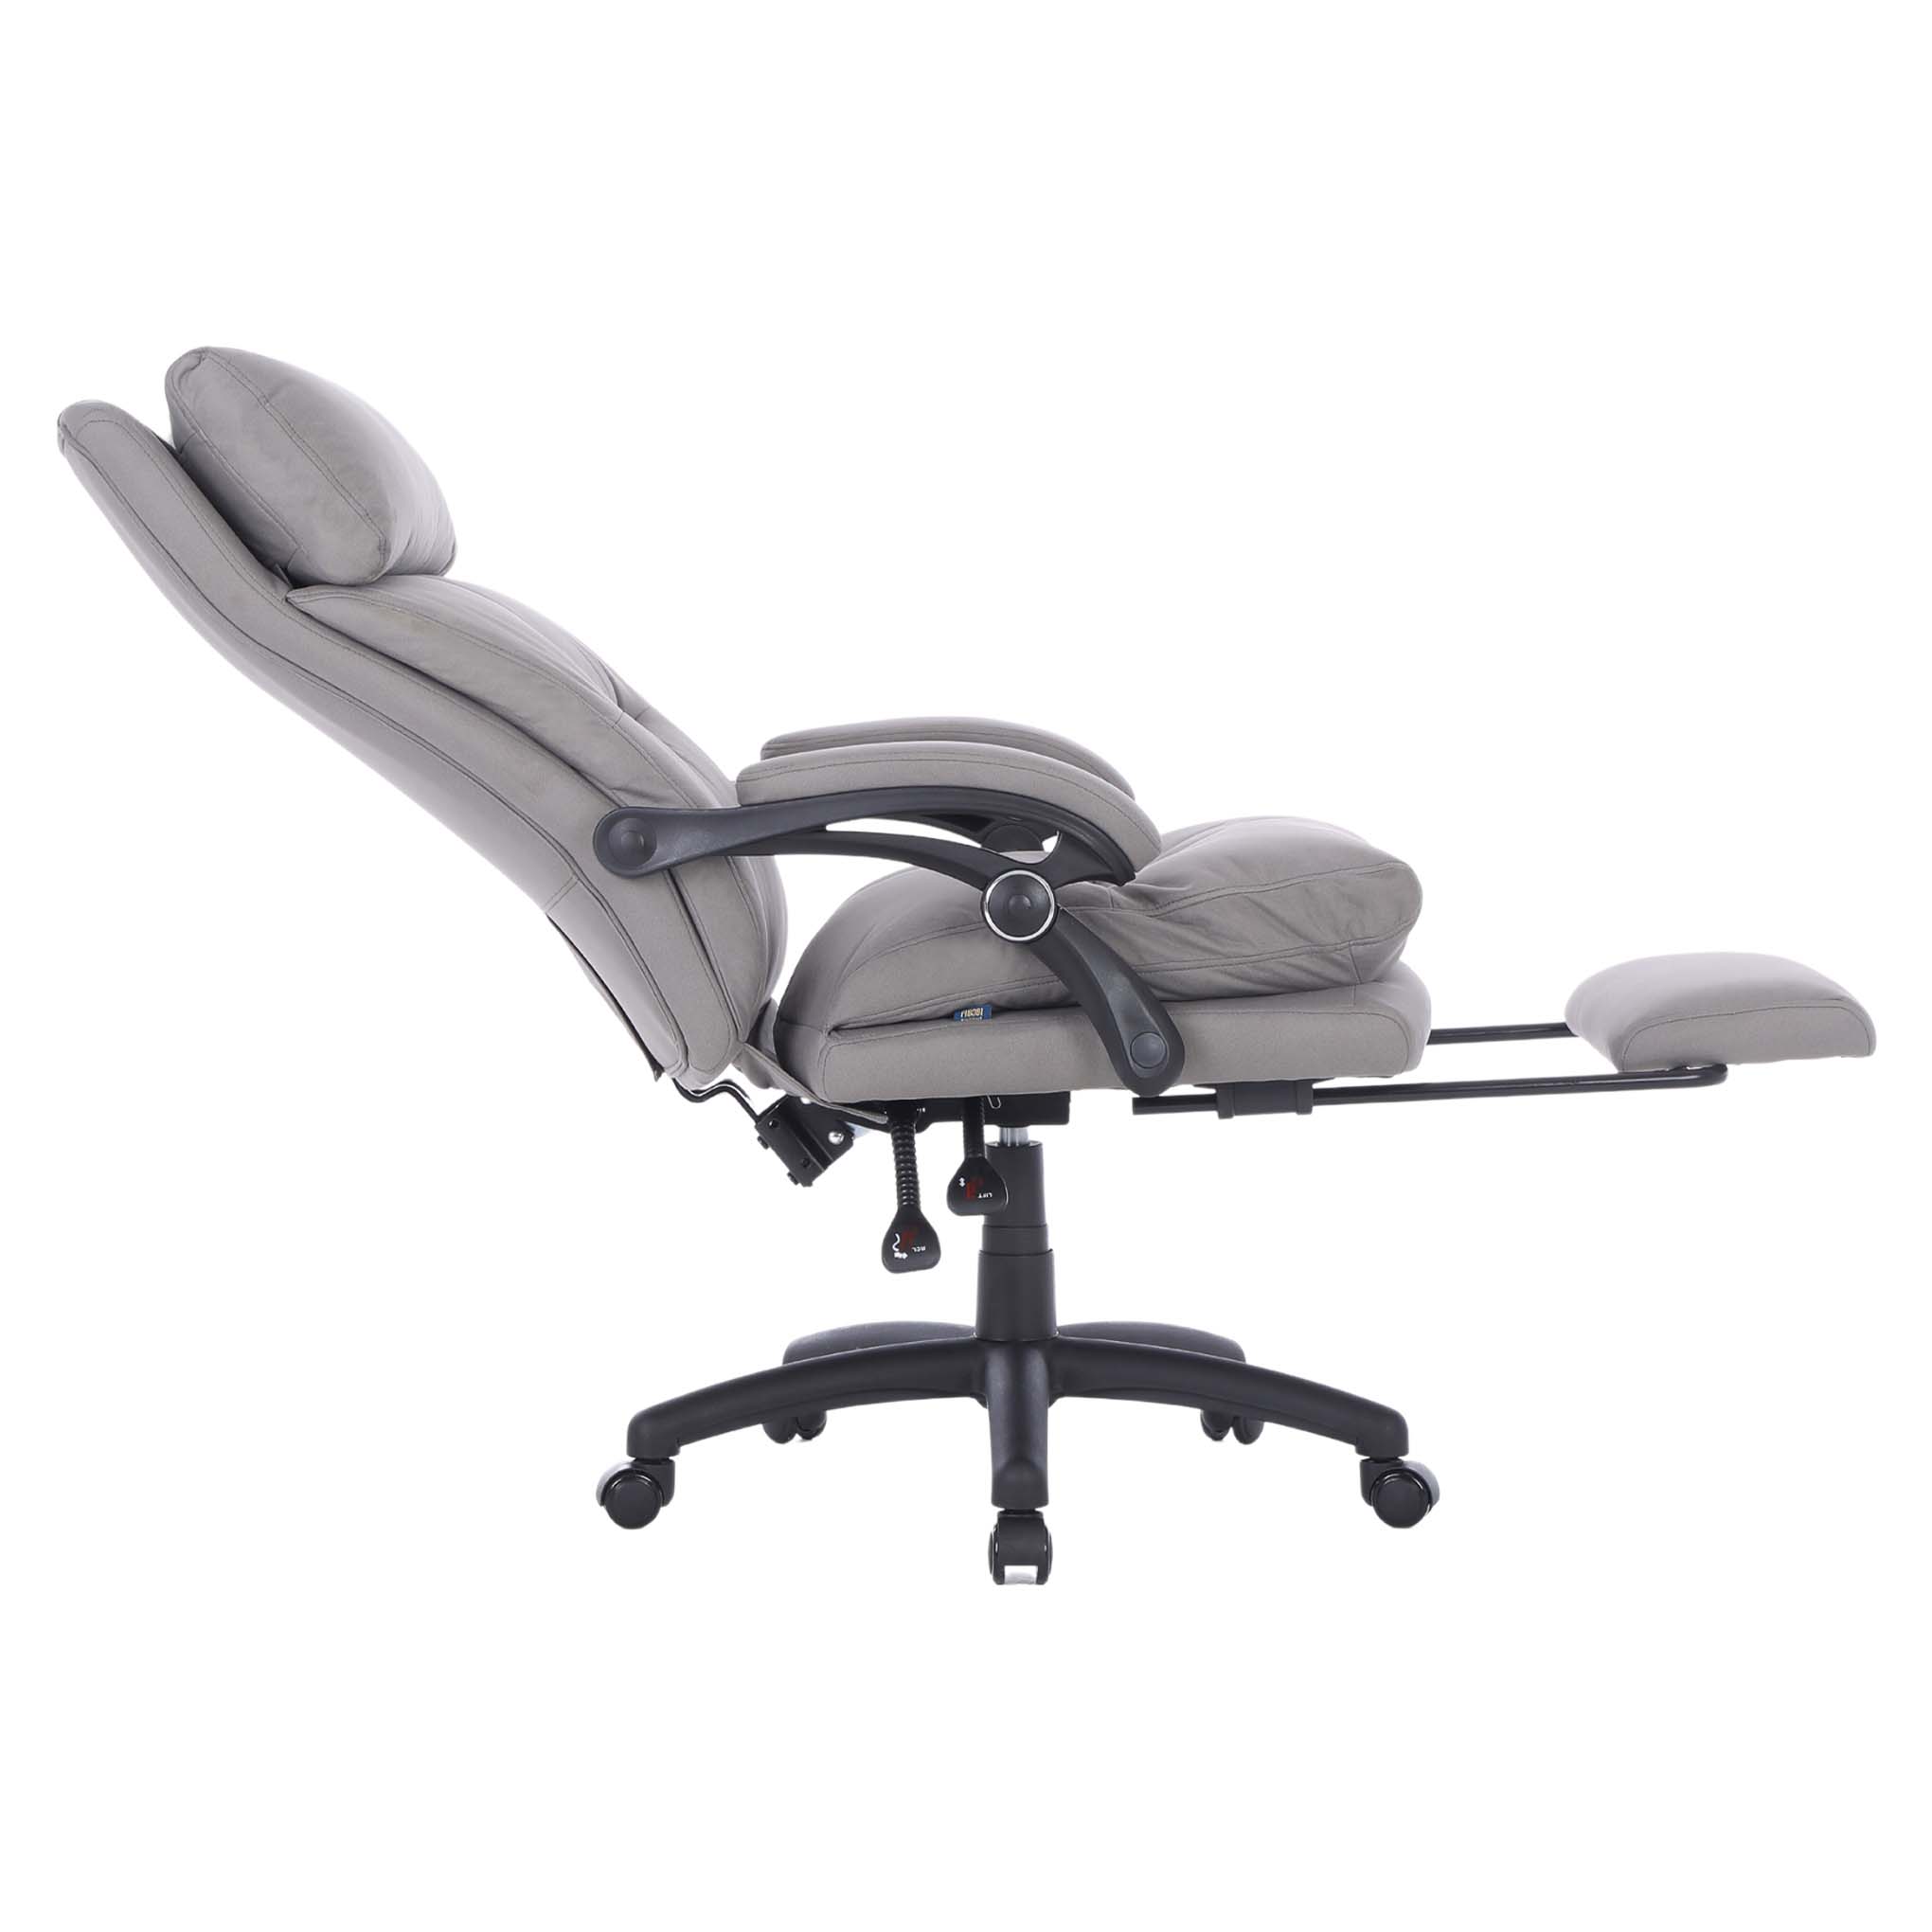 Lotta High Back Office Chair with Footrest